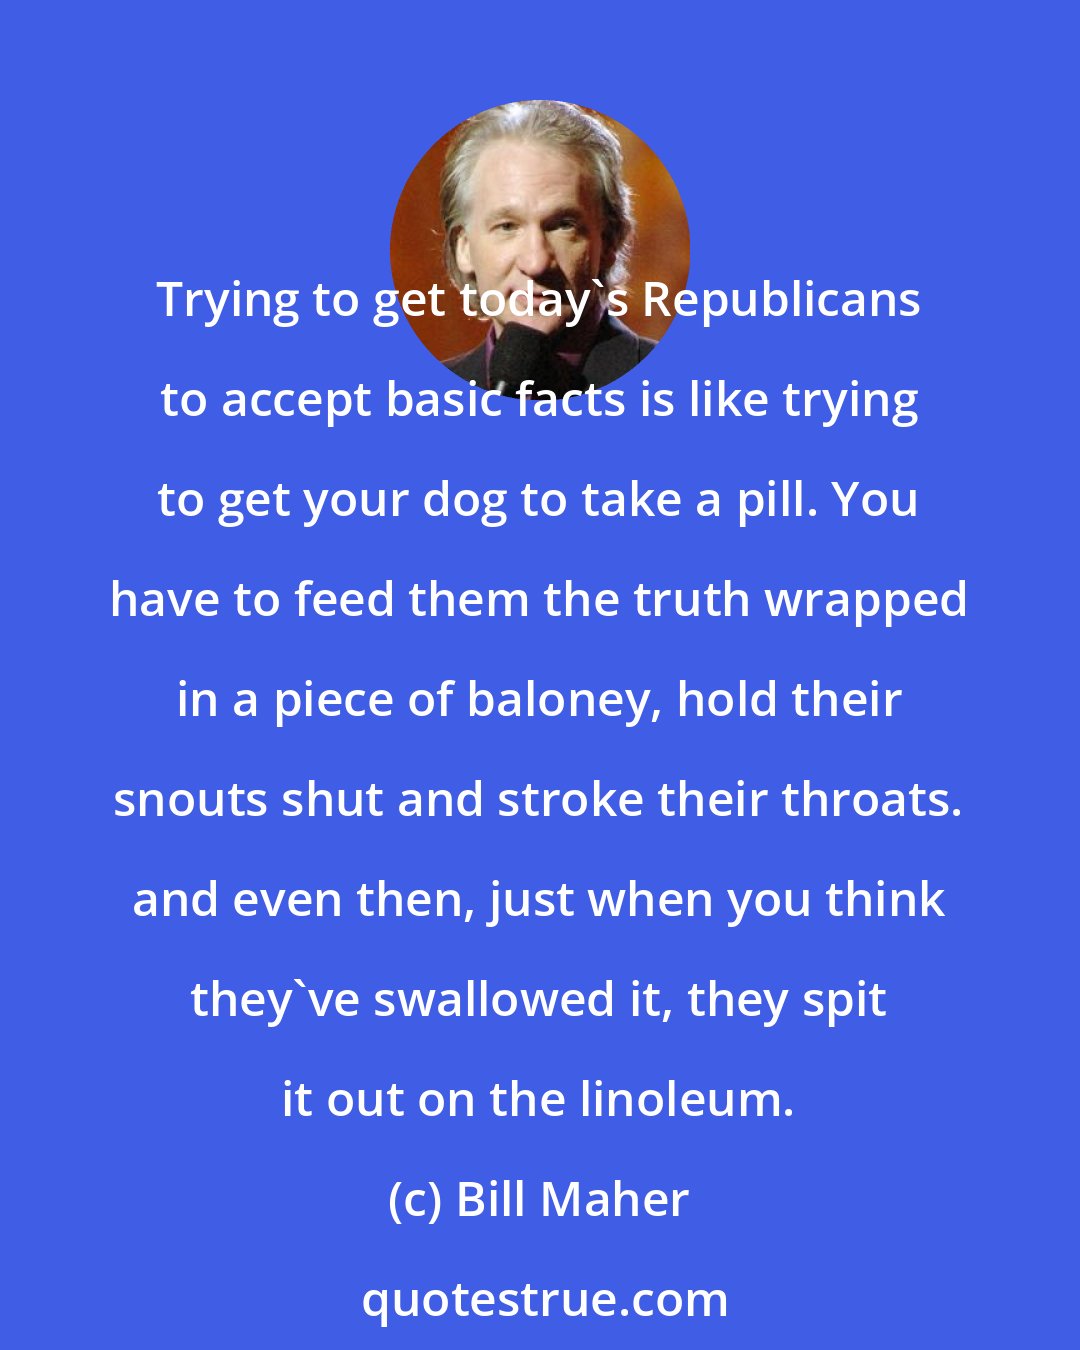 Bill Maher: Trying to get today's Republicans to accept basic facts is like trying to get your dog to take a pill. You have to feed them the truth wrapped in a piece of baloney, hold their snouts shut and stroke their throats. and even then, just when you think they've swallowed it, they spit it out on the linoleum.